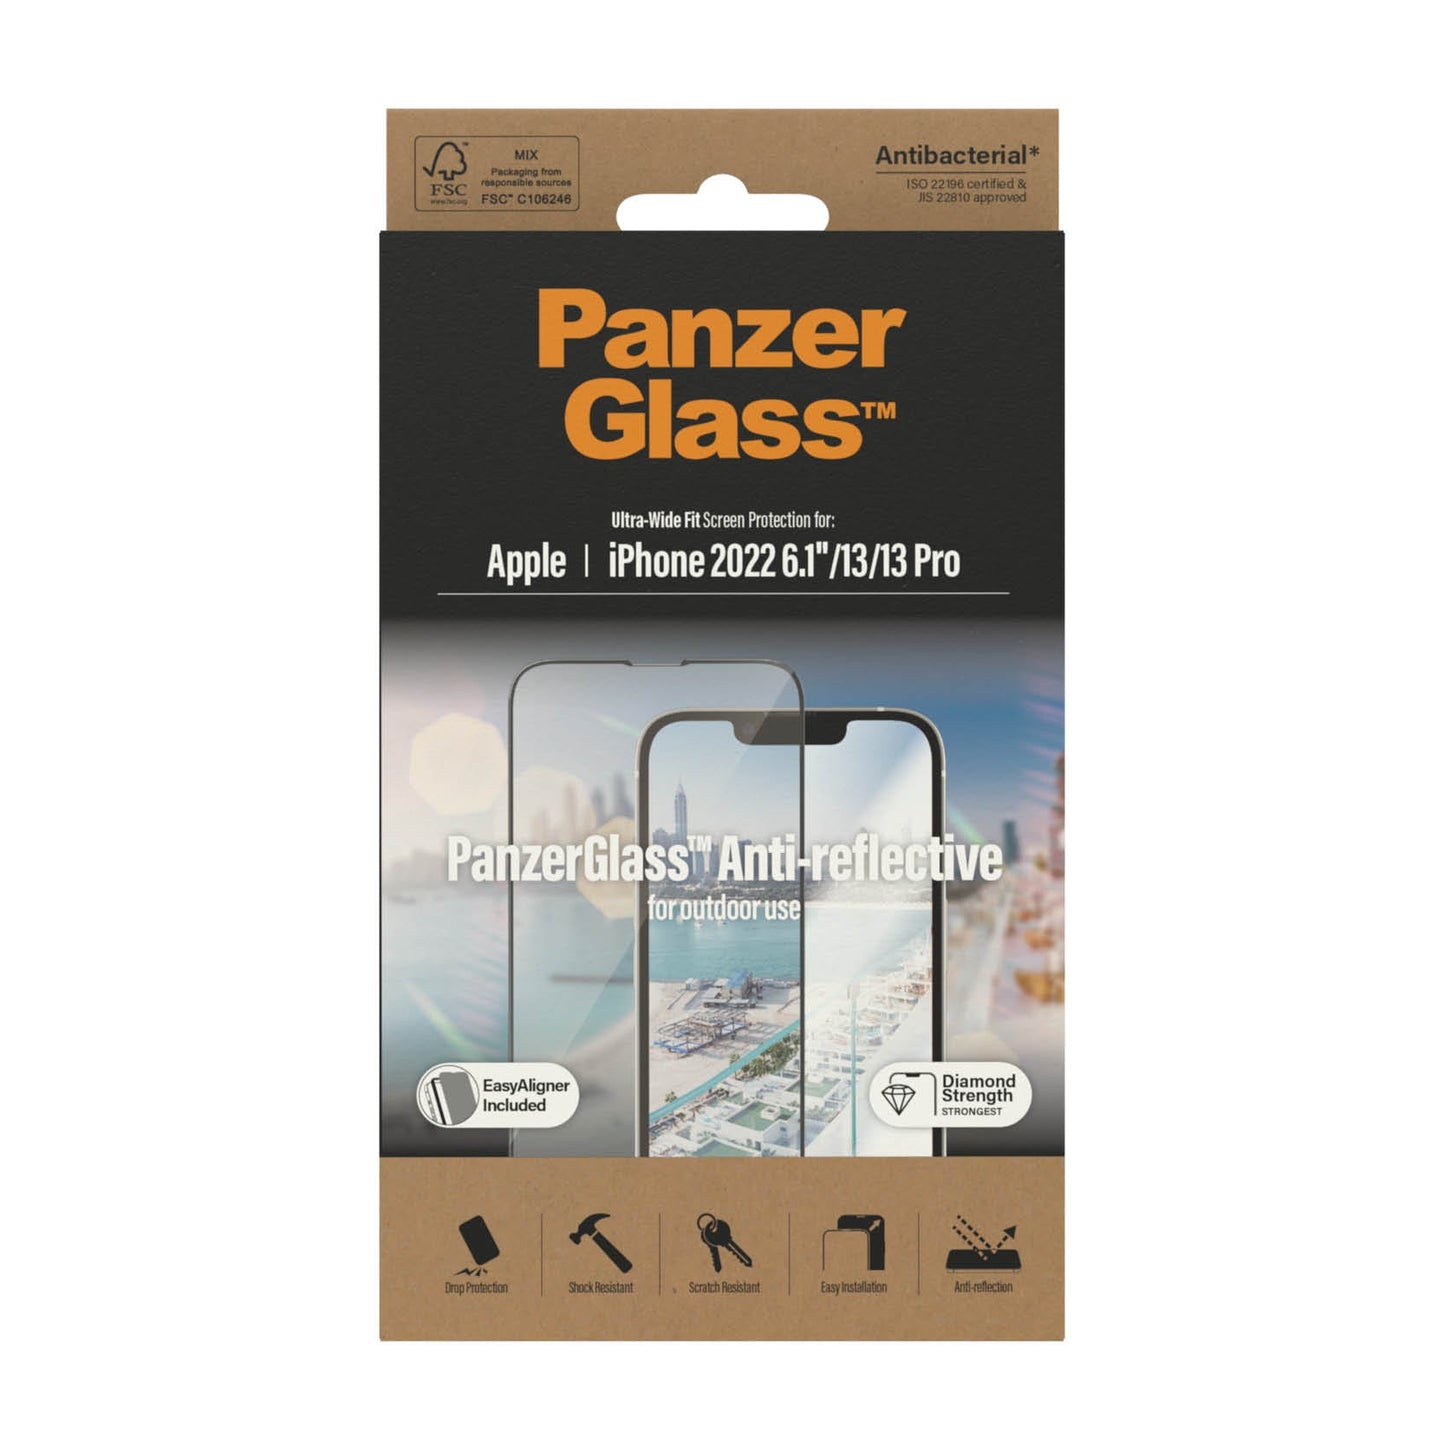 PanzerGlass™ Anti-Reflection Ultra-Wide Fit Screen Protector for iPhone 14, iPhone 13/13 Pro - Anti-Reflection